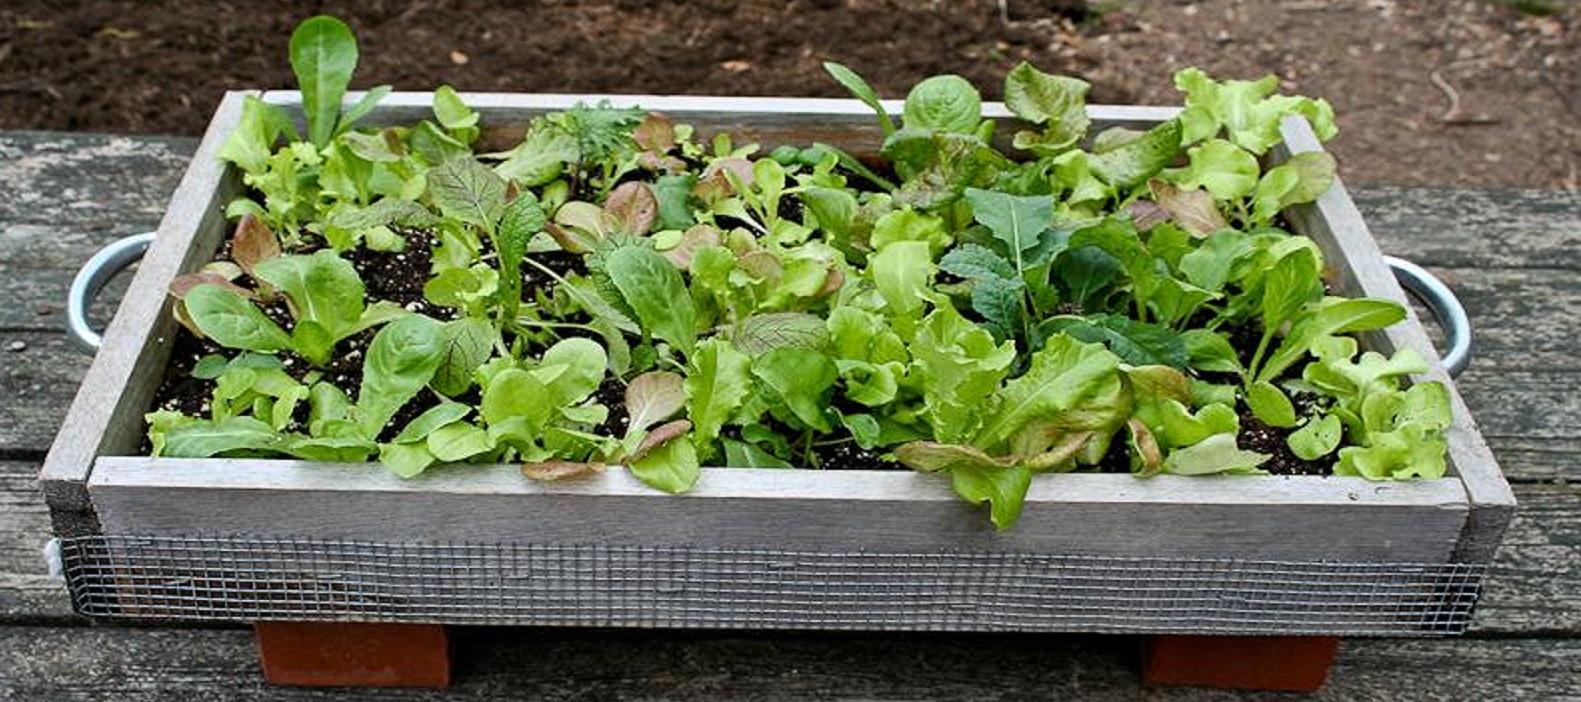 Salad box full of greens ready to be harvested